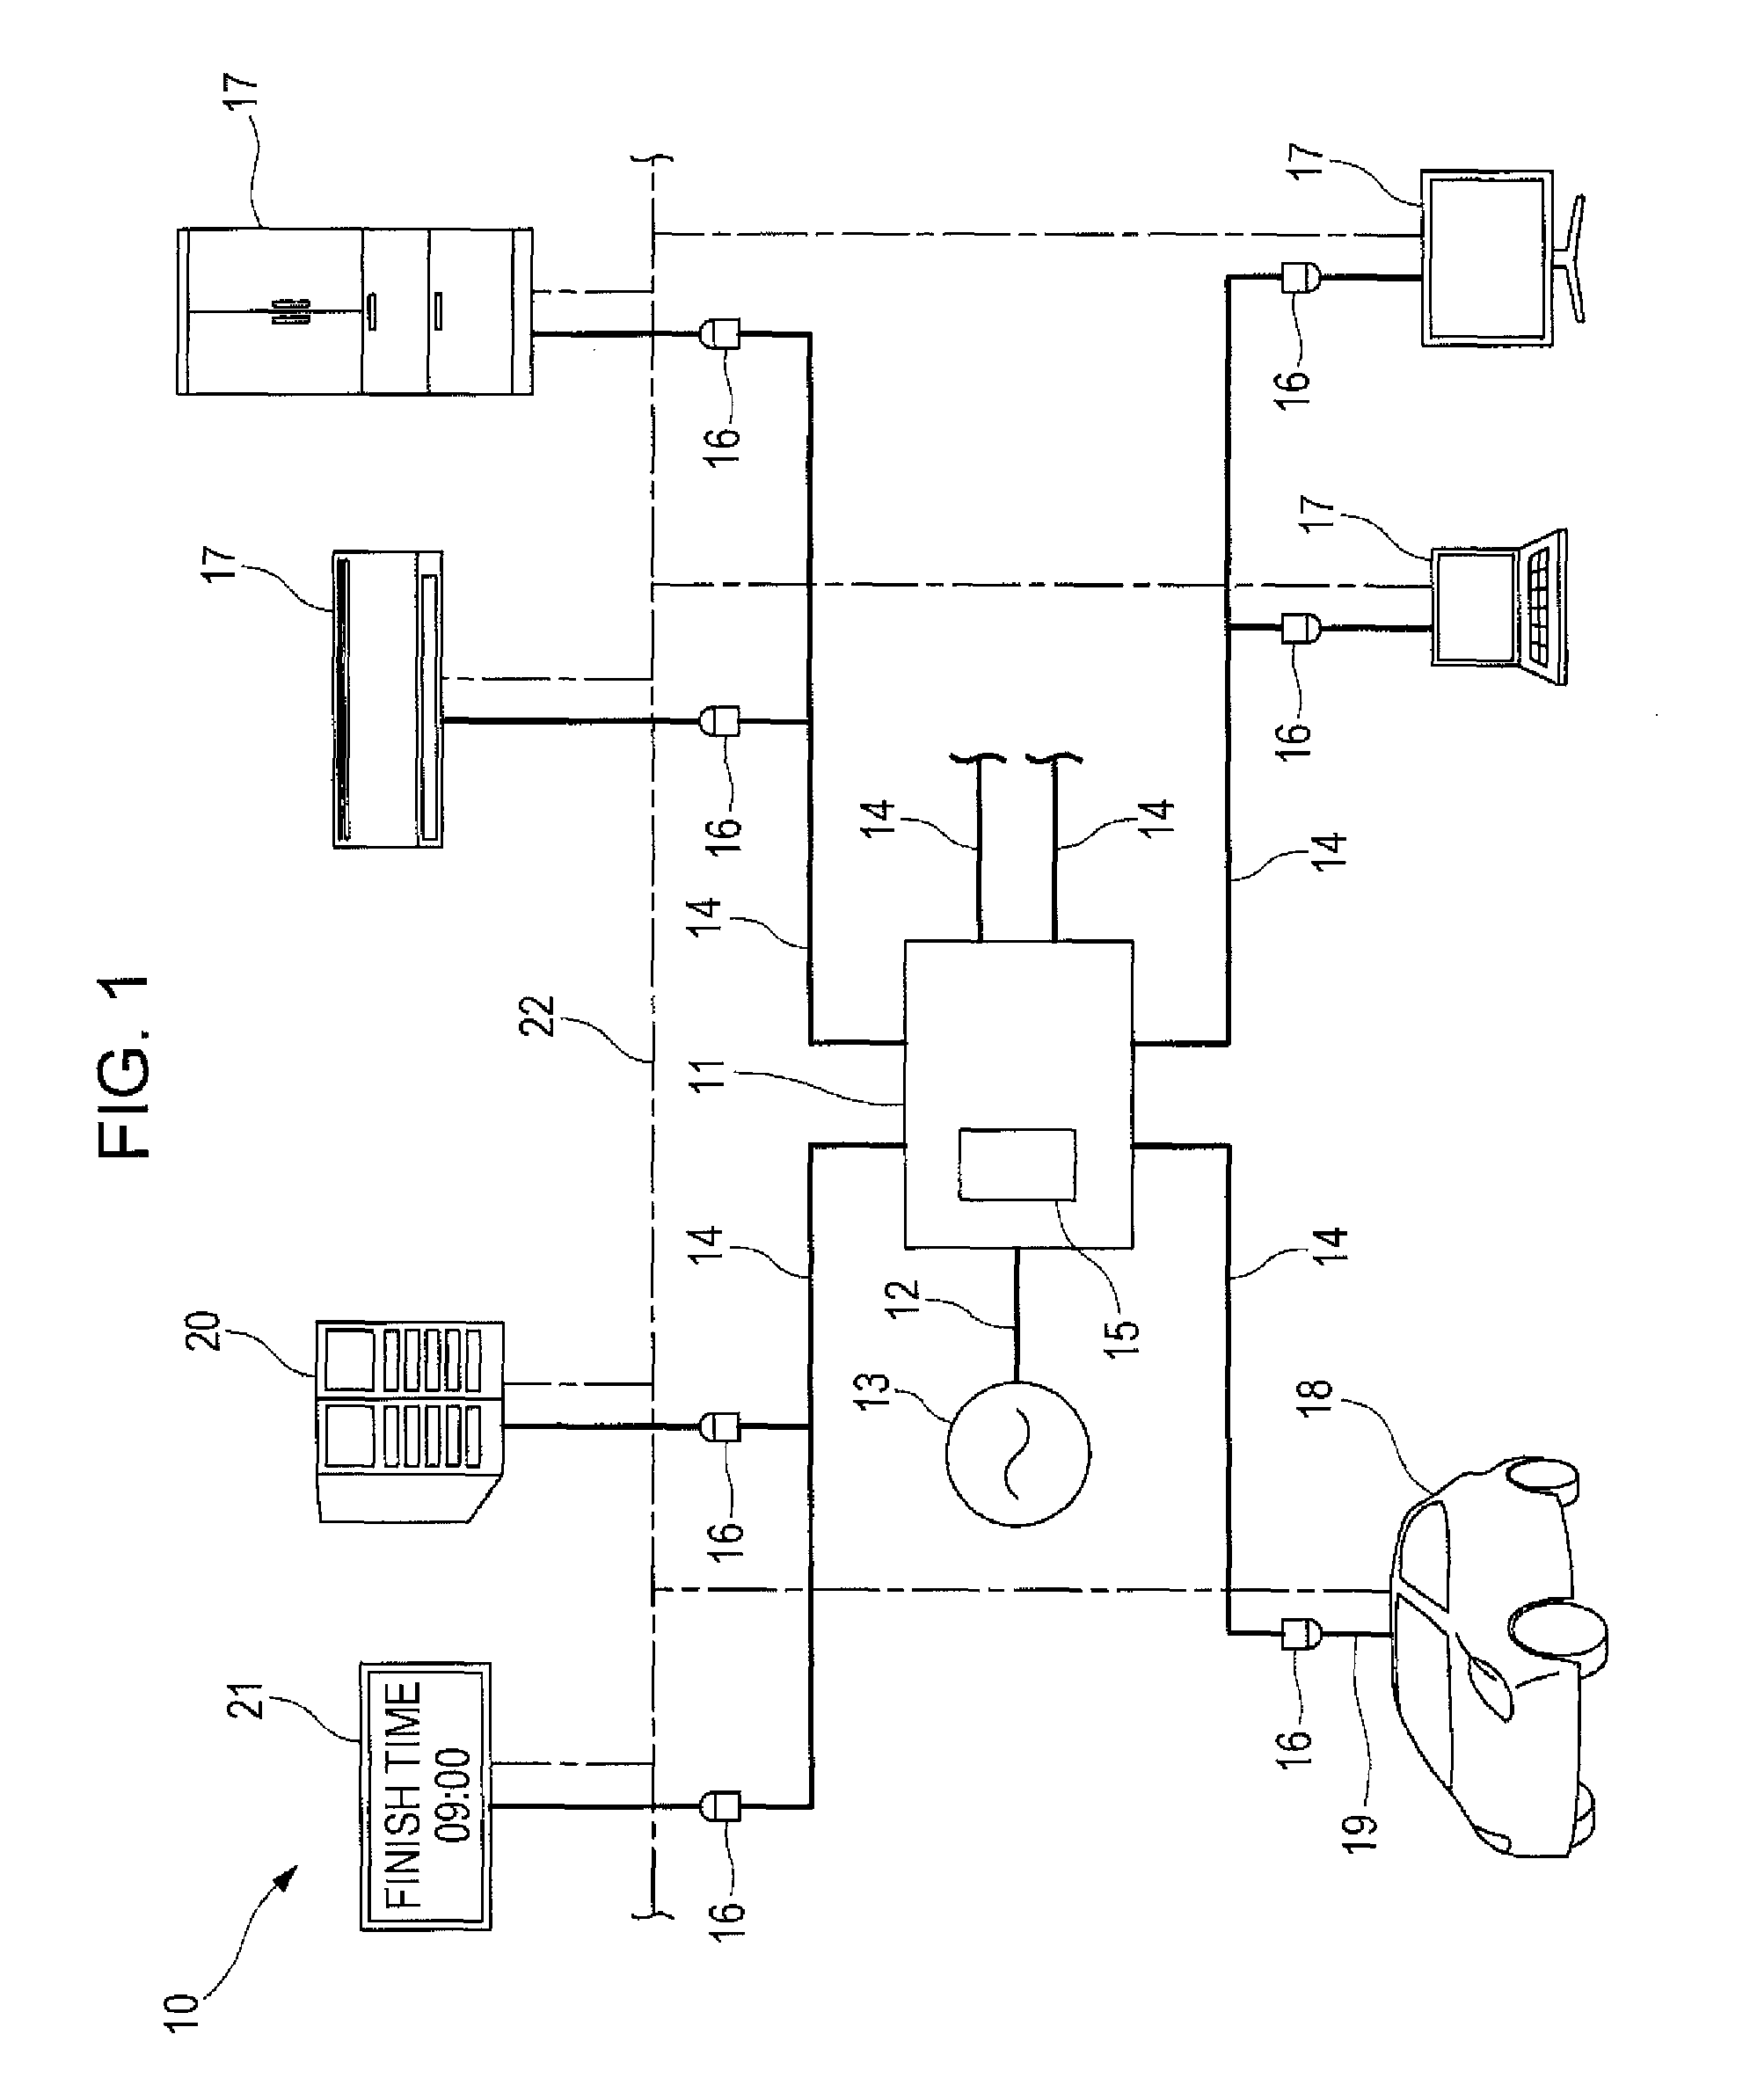 Power supply system, electric vehicle and charging adapter